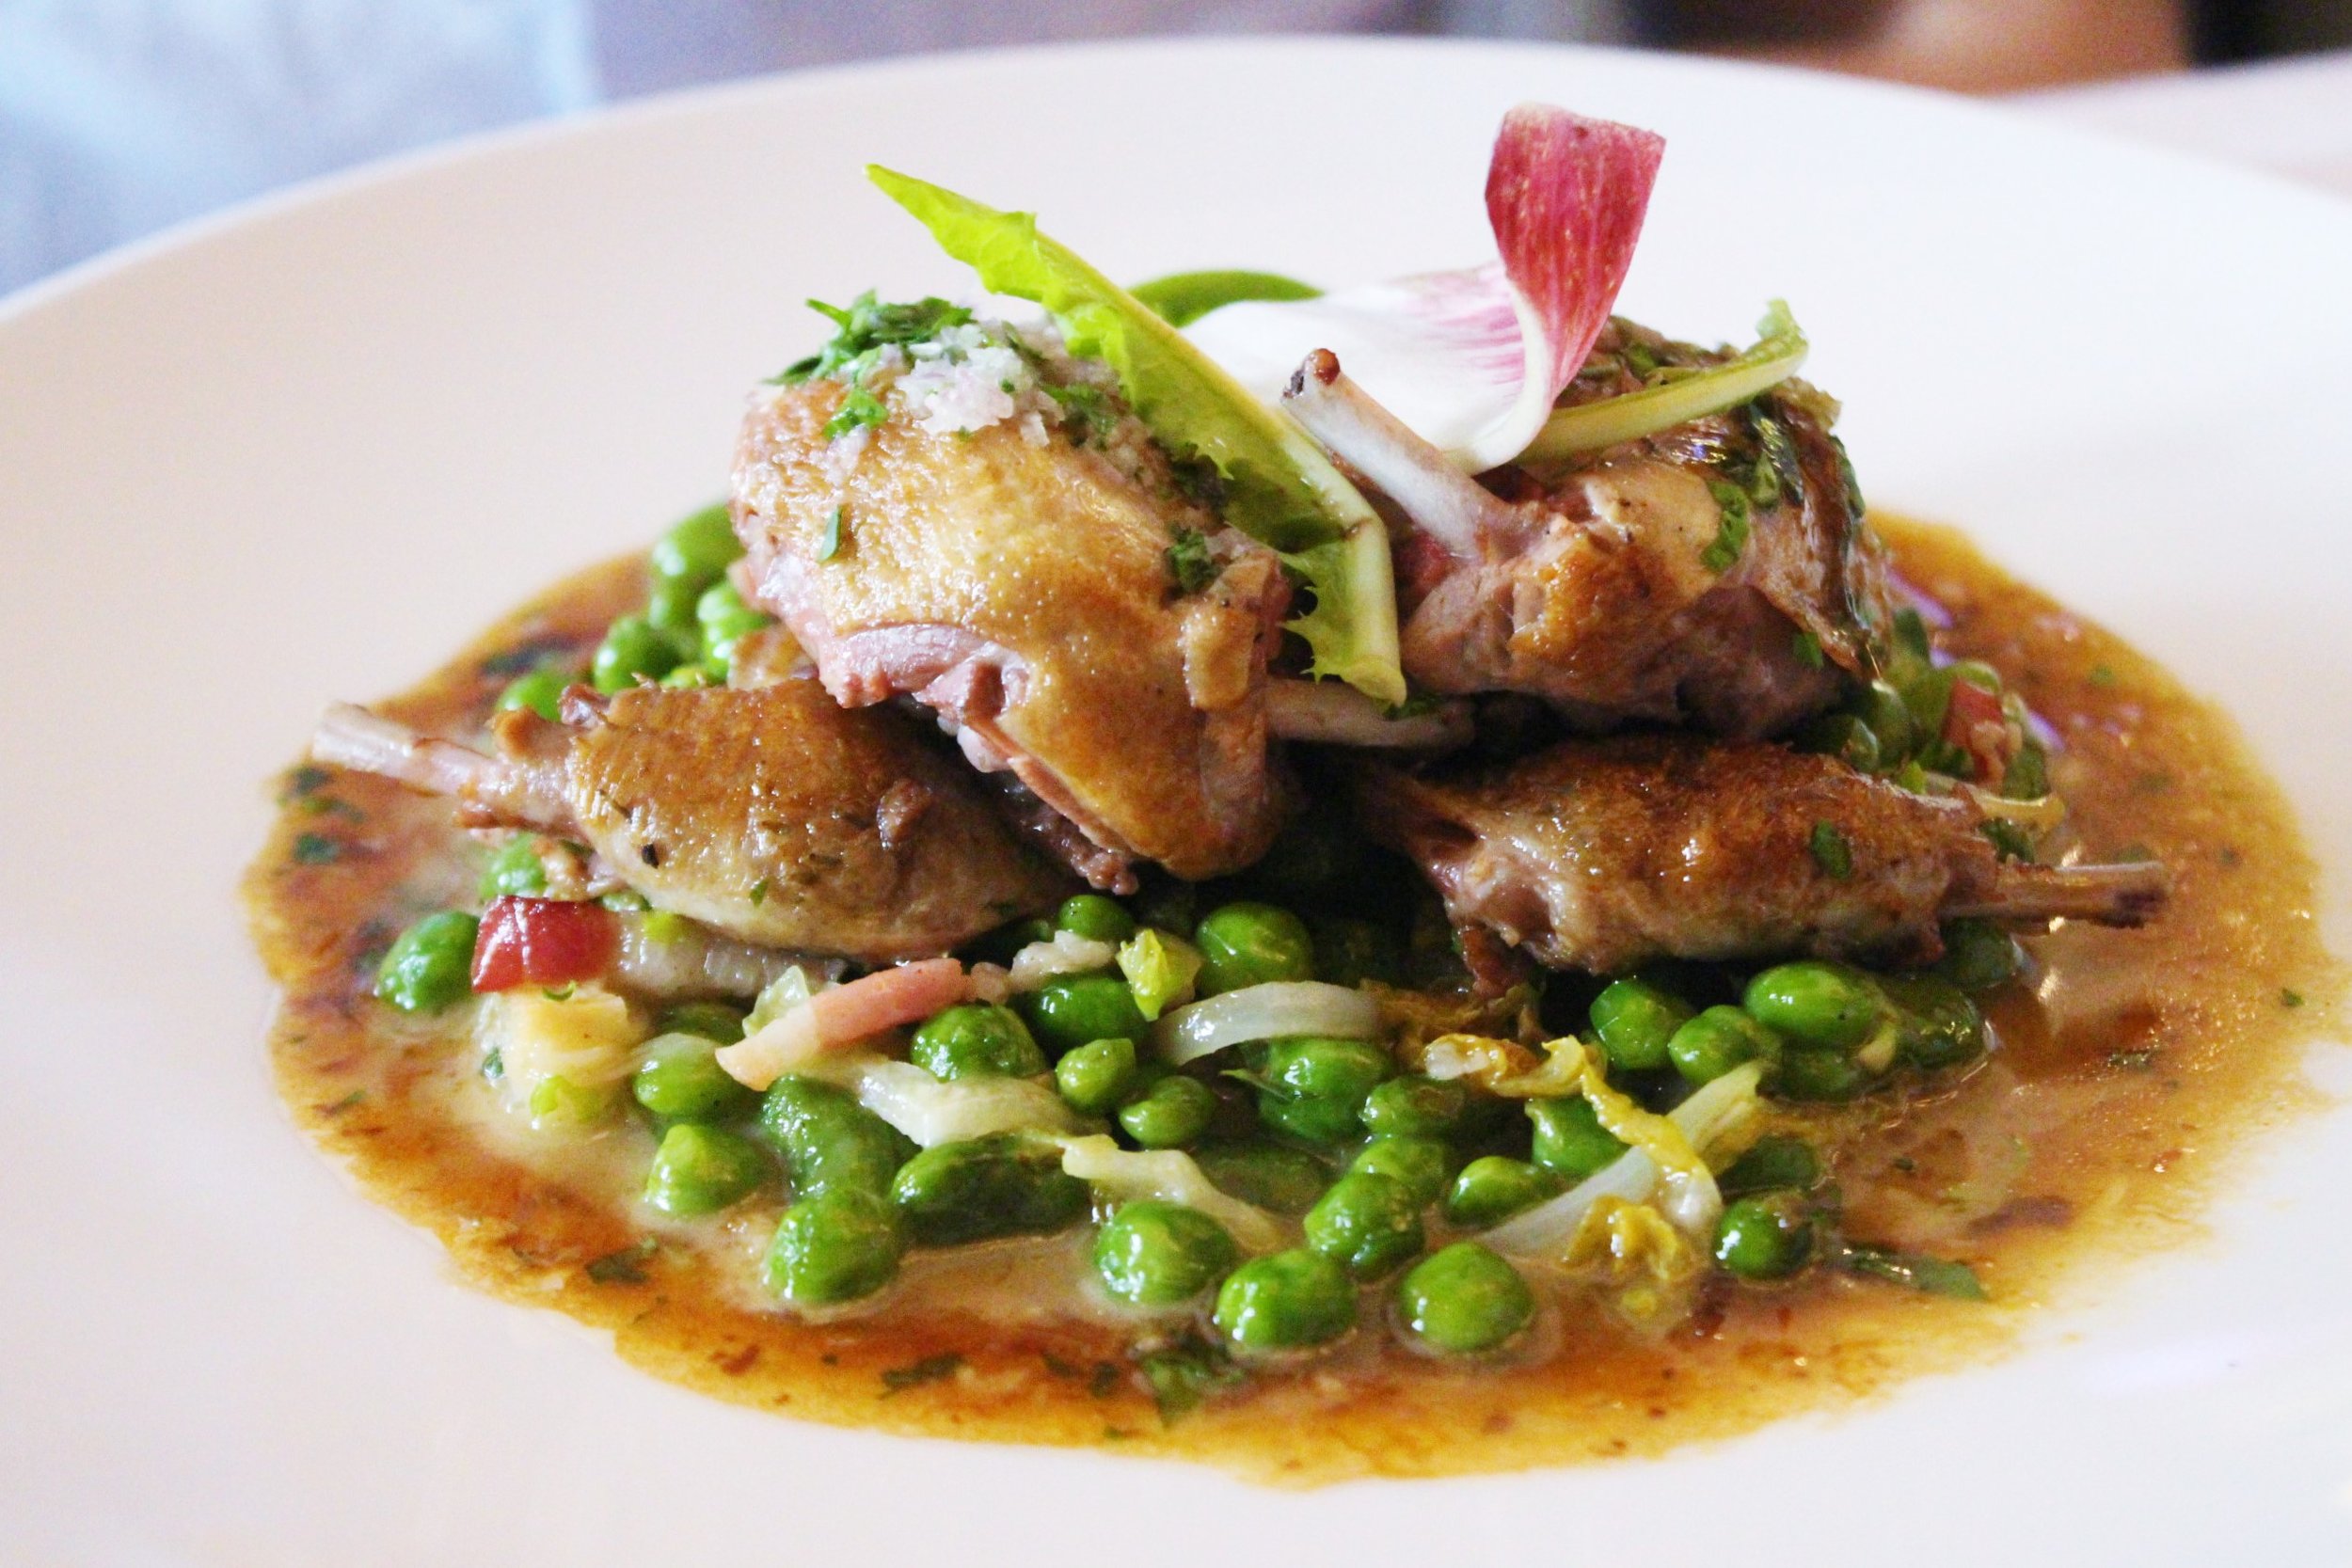 Pigeon Roasted with Grey Shallots, Petits Pois, and Broad Beans a la Francaise